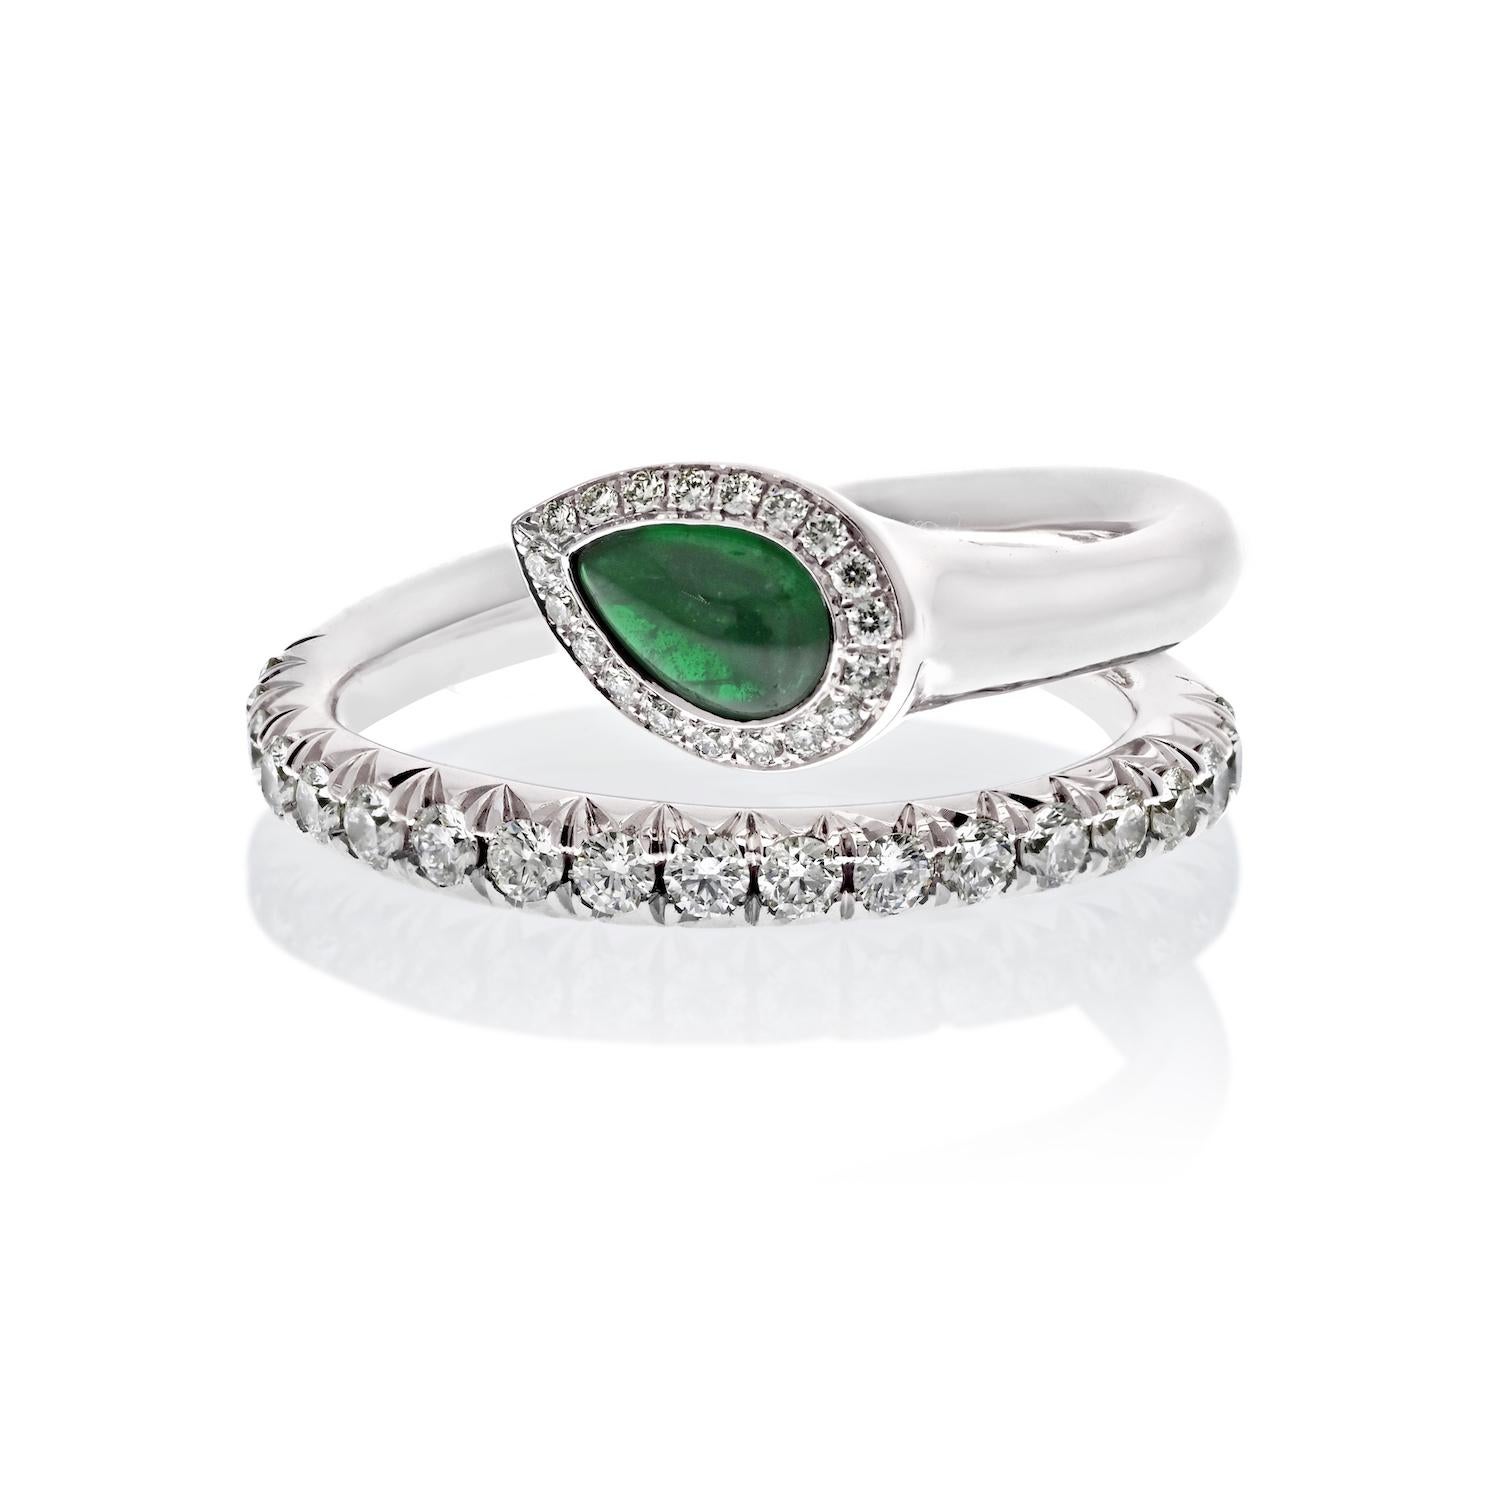 Elegance and Sophistication: The Handmade Platinum Cabochon Cut Serpent Ring.

Experience the timeless allure of fine jewelry with this exquisite handmade platinum ring. Embracing the charm of a serpent, a symbol of transformation and rebirth, this